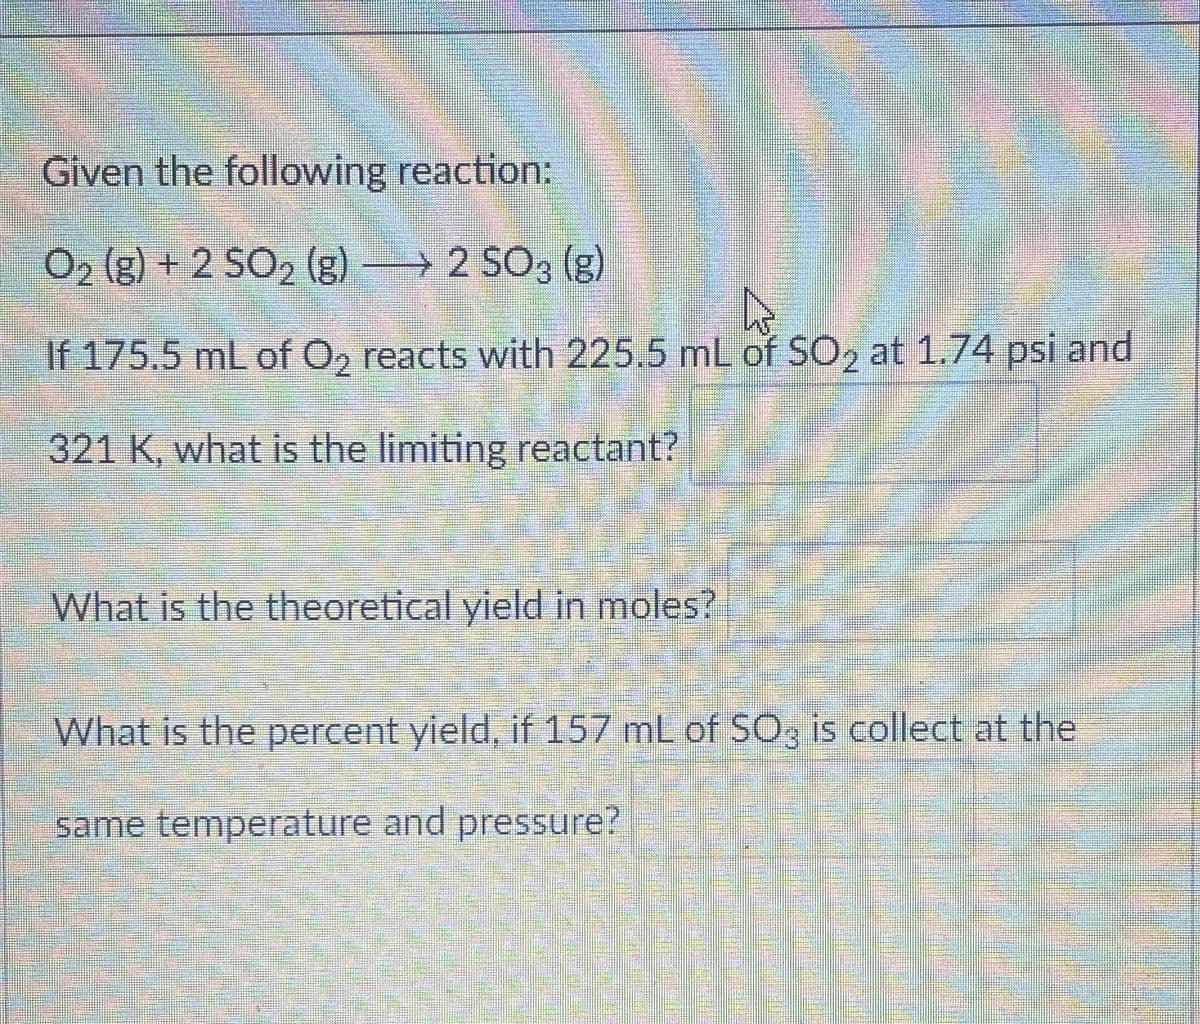 Given the following reaction:
O2 (g) + 2 SO2 (g) 2 SO3 (g)
→
D
If 175.5 mL of O2 reacts with 225.5 mL of SO2 at 1.74 psi and
321 K, what is the limiting reactant?
What is the theoretical yield in moles?
What is the percent yield, if 157 mL of SO3 is collect at the
same temperature and pressure?